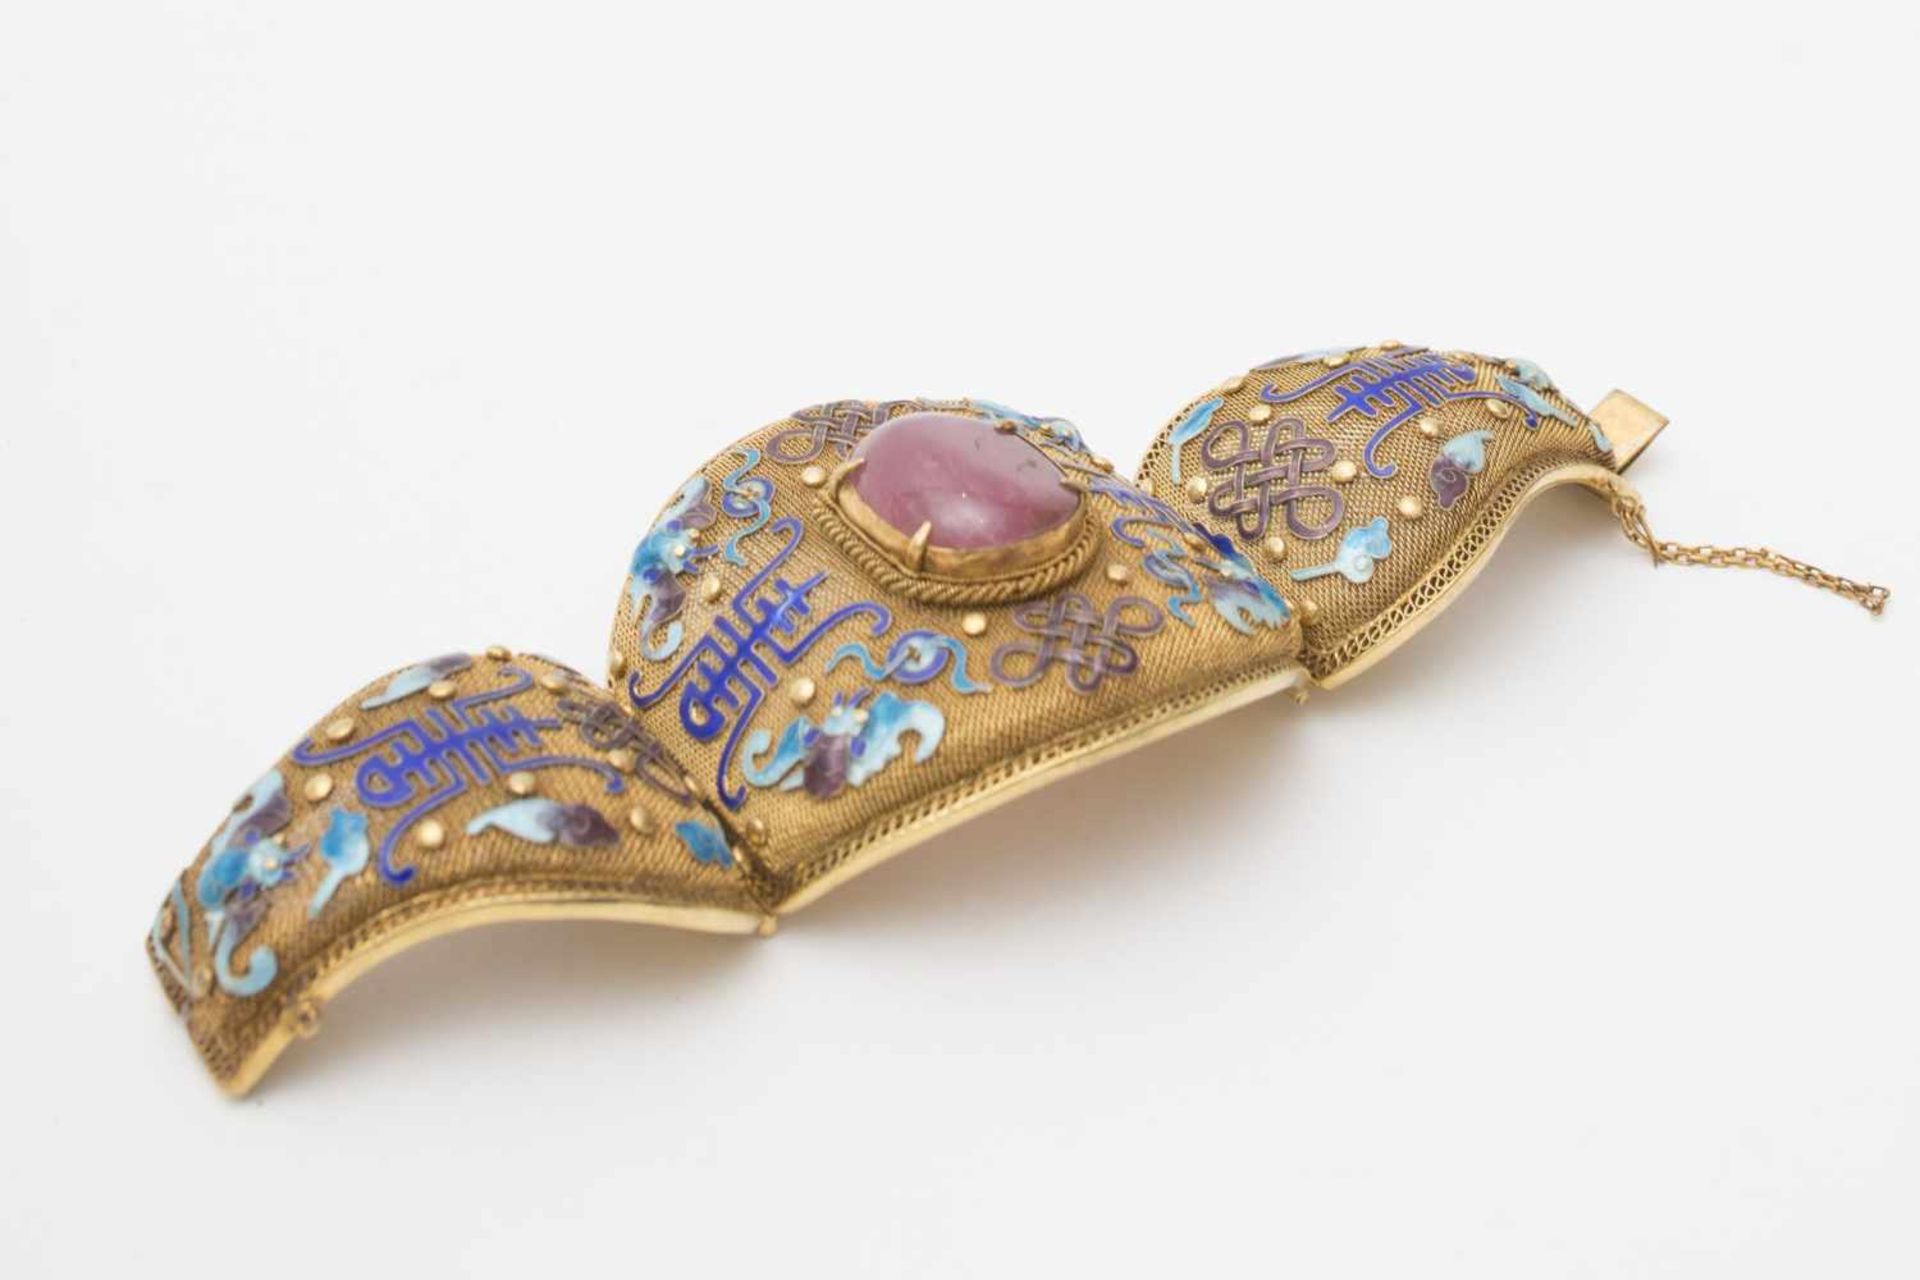 Bracelet set with a tourmaline - China, 20th century Articulated, composed of 3 gilded silver